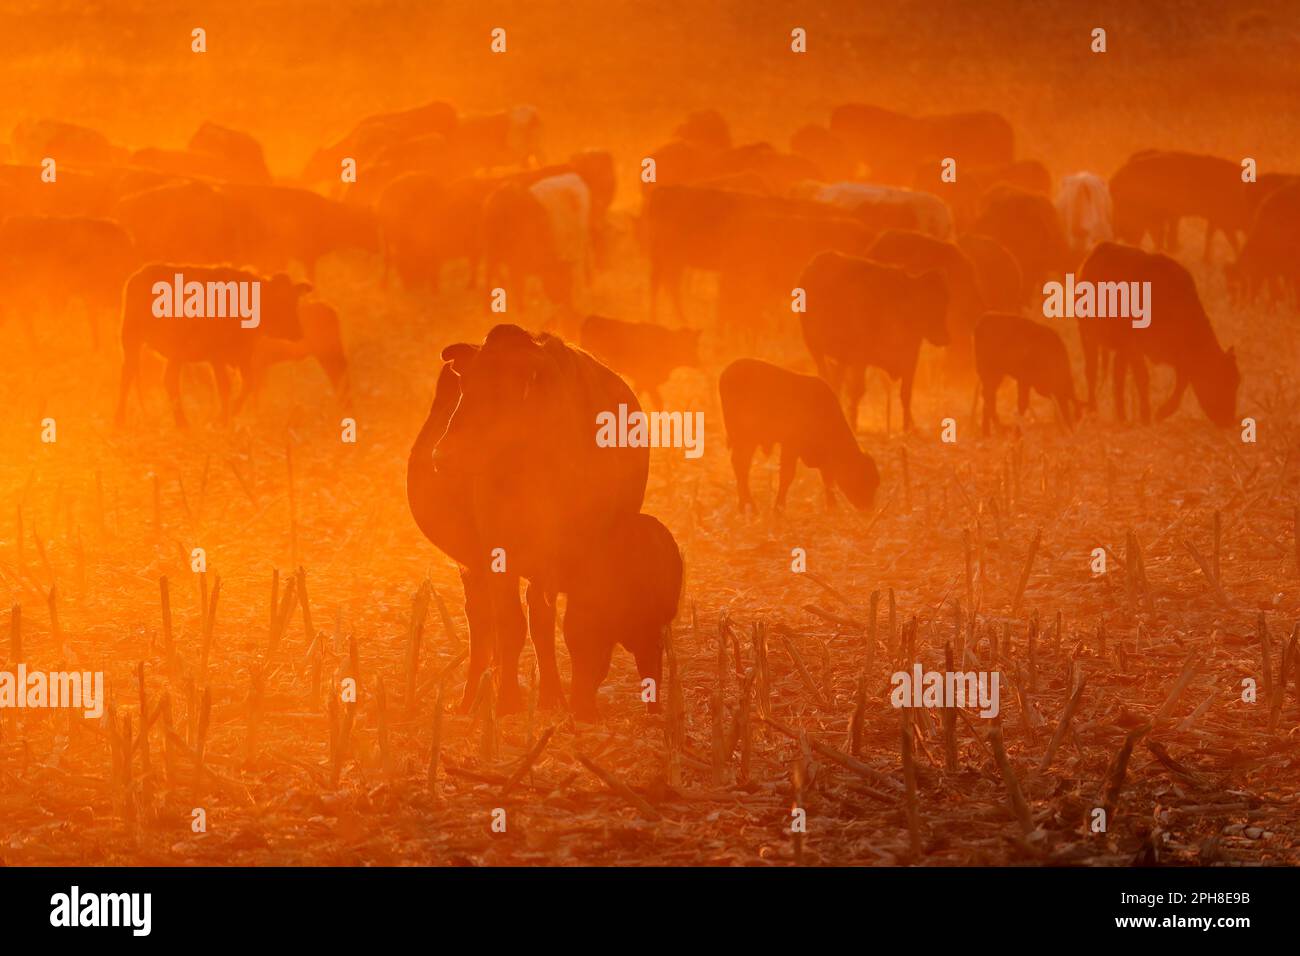 Silhouette of free-range cattle walking on dusty field at sunset, South Africa Stock Photo